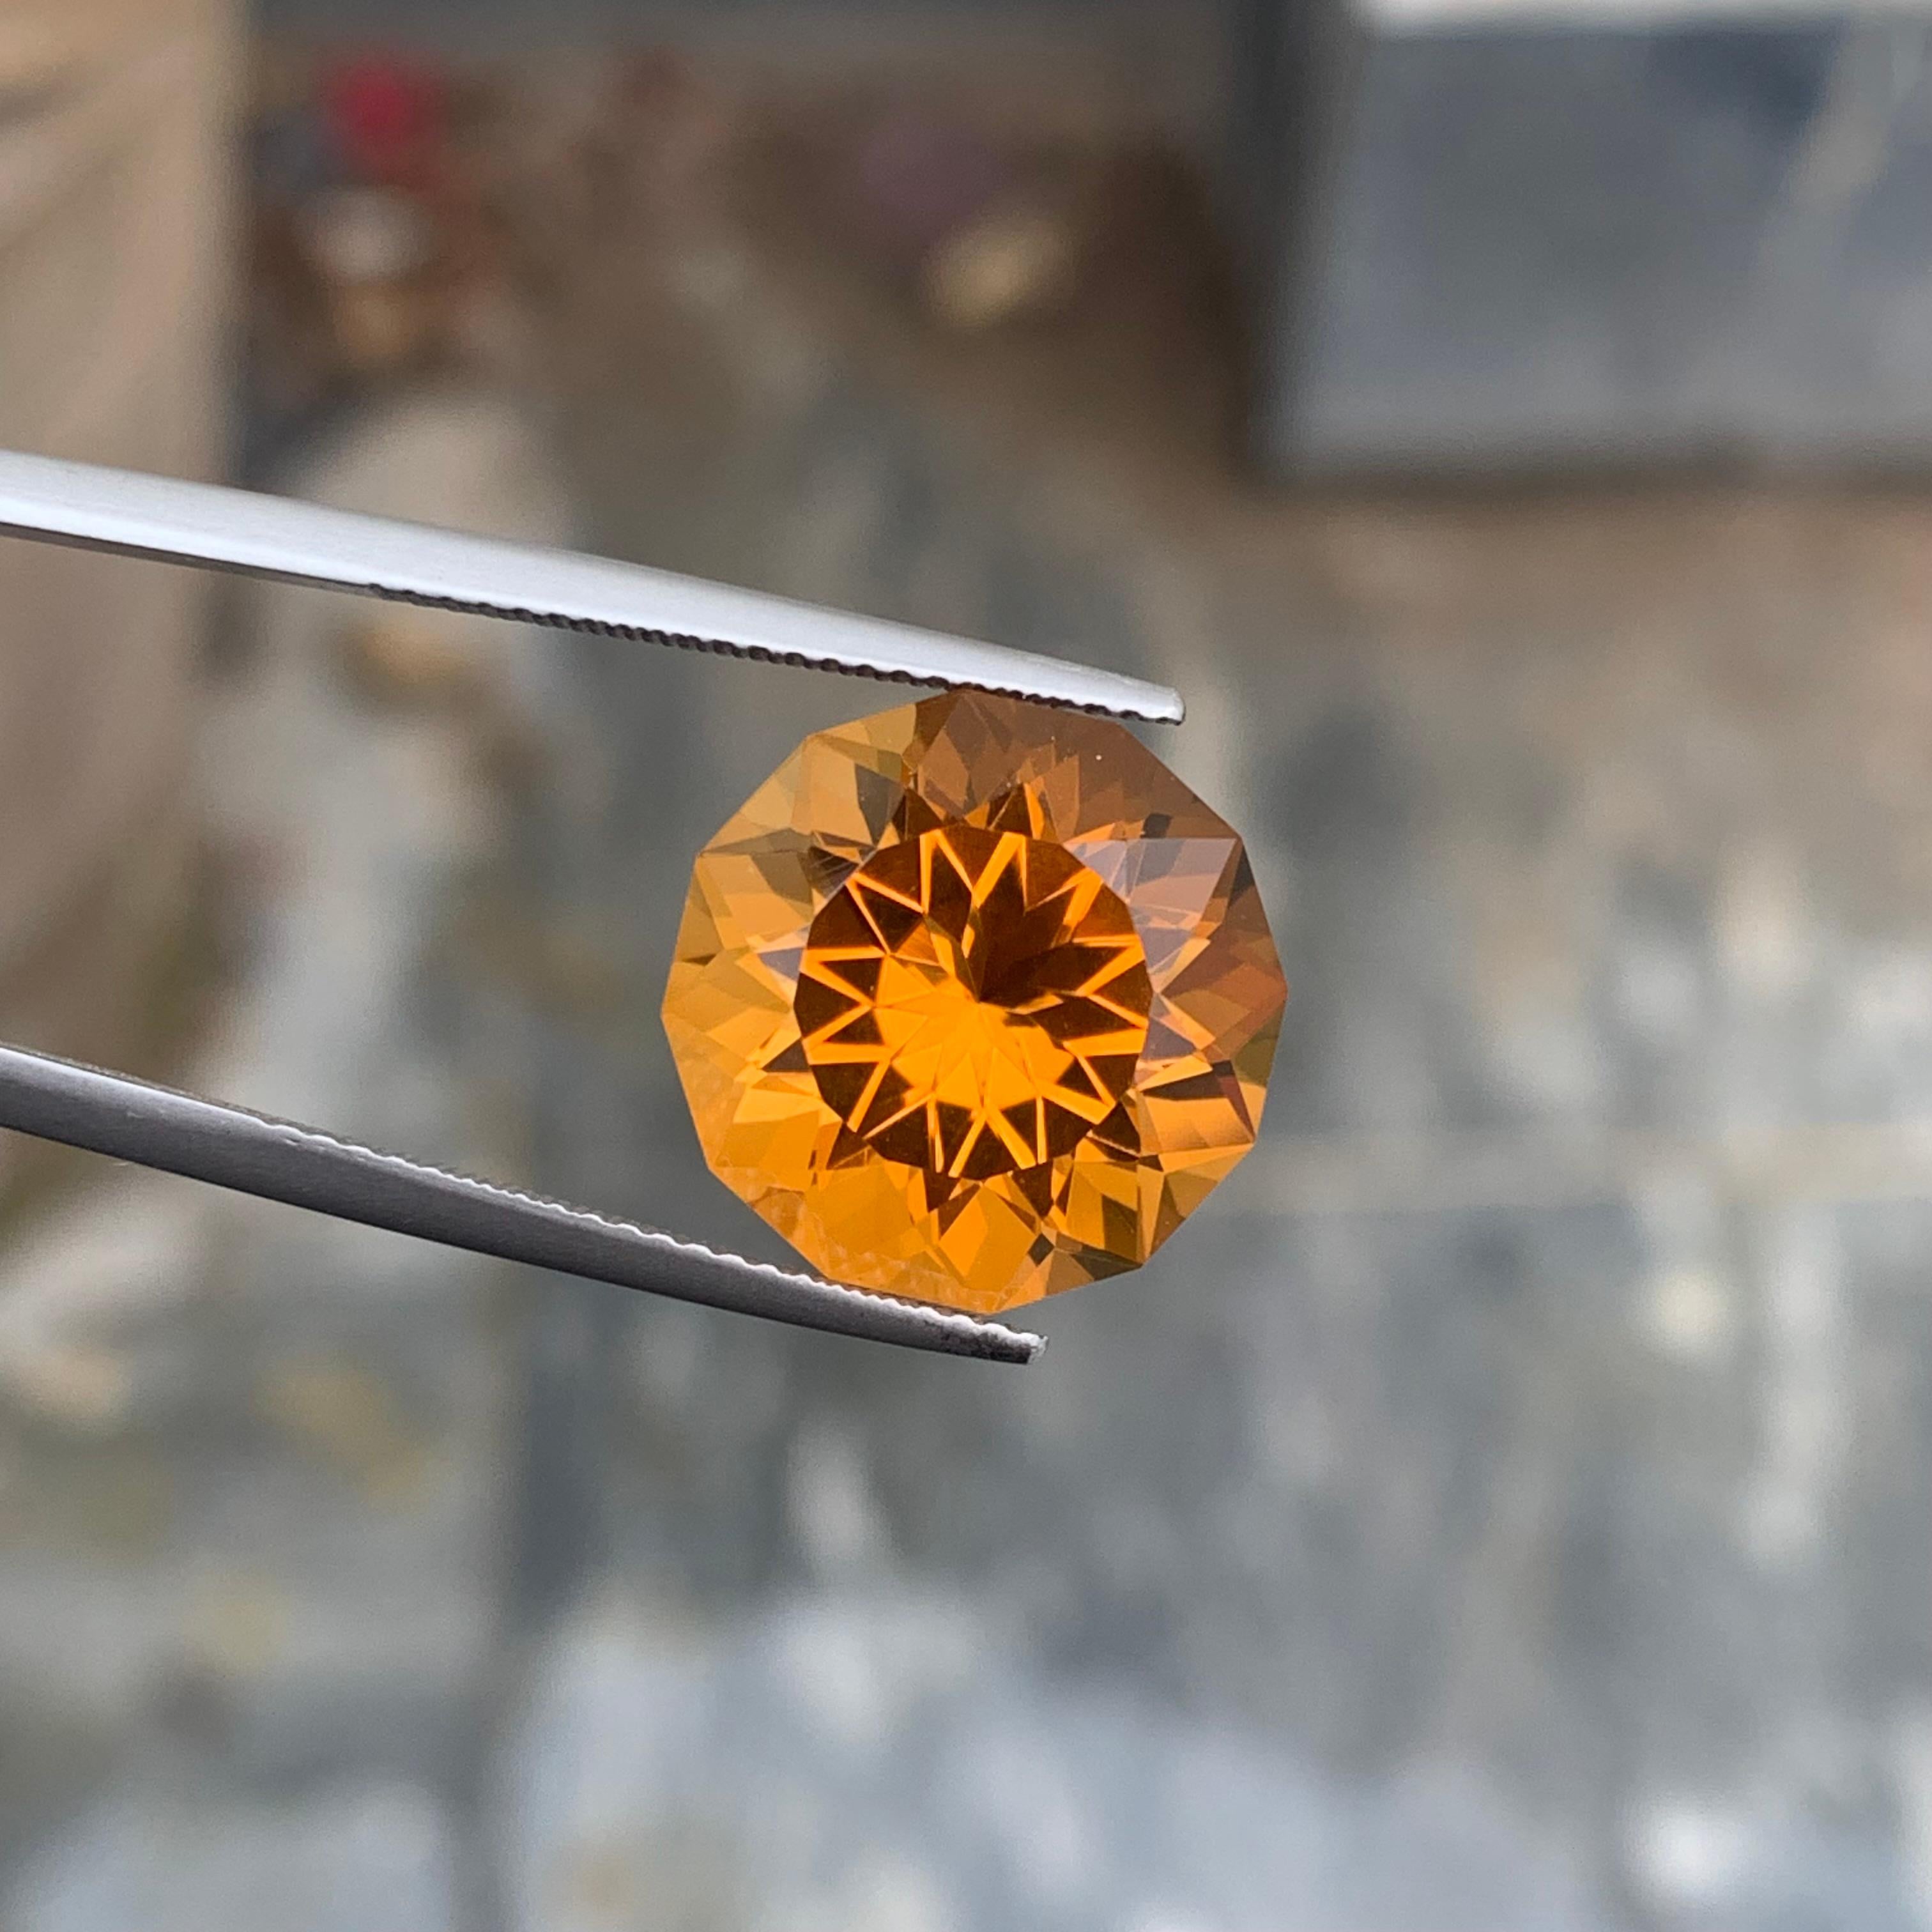 Faceted Mandarin Citrine
Weight : 10.55 Carats
Dimensions : 14.4x14.4x10.2 Mm
Clarity : Loupe Clean 
Origin : Brazil
Color: Orange 
Shape: Round
Certificate: On Demand
Month: November
.
The Many Healing Properties of Citrine
Increase Optimism, And